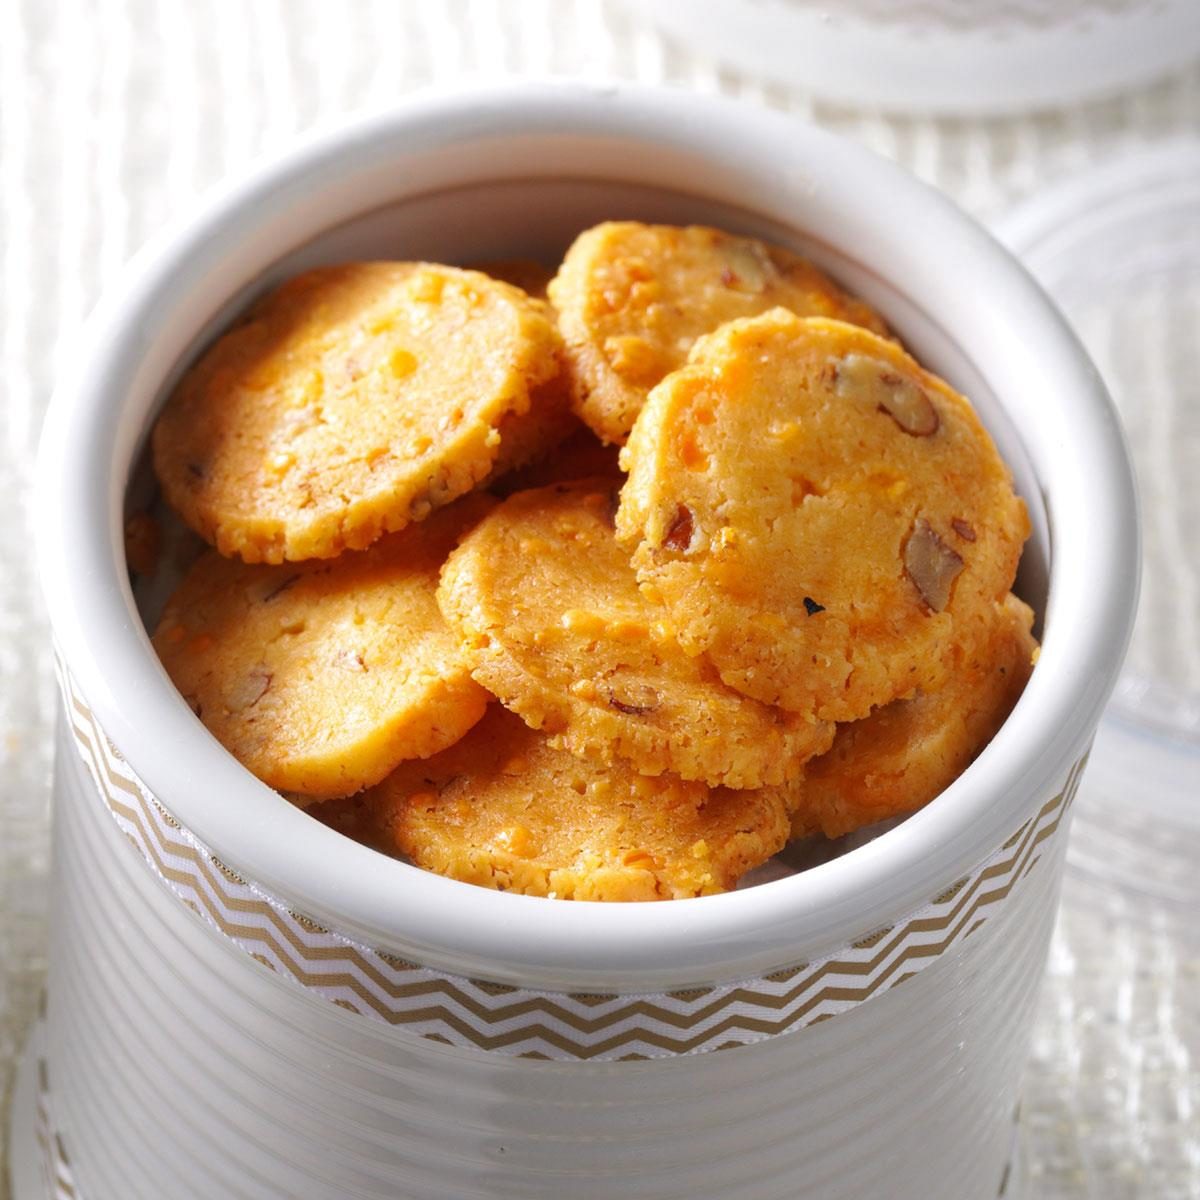 <p>Lots of holiday treats are sweet. For a change of pace, I fill goodie bags with my cheese crackers. The recipe has a large yield, but you can freeze the dough logs to bake later. —Heather Necessary, Shamokin Dan, Pennsylvania</p> <div class="listicle-page__buttons"> <div class="listicle-page__cta-button"><a href='https://www.tasteofhome.com/recipes/cheddar-pecan-crisps/'>Get Recipe</a></div> </div>